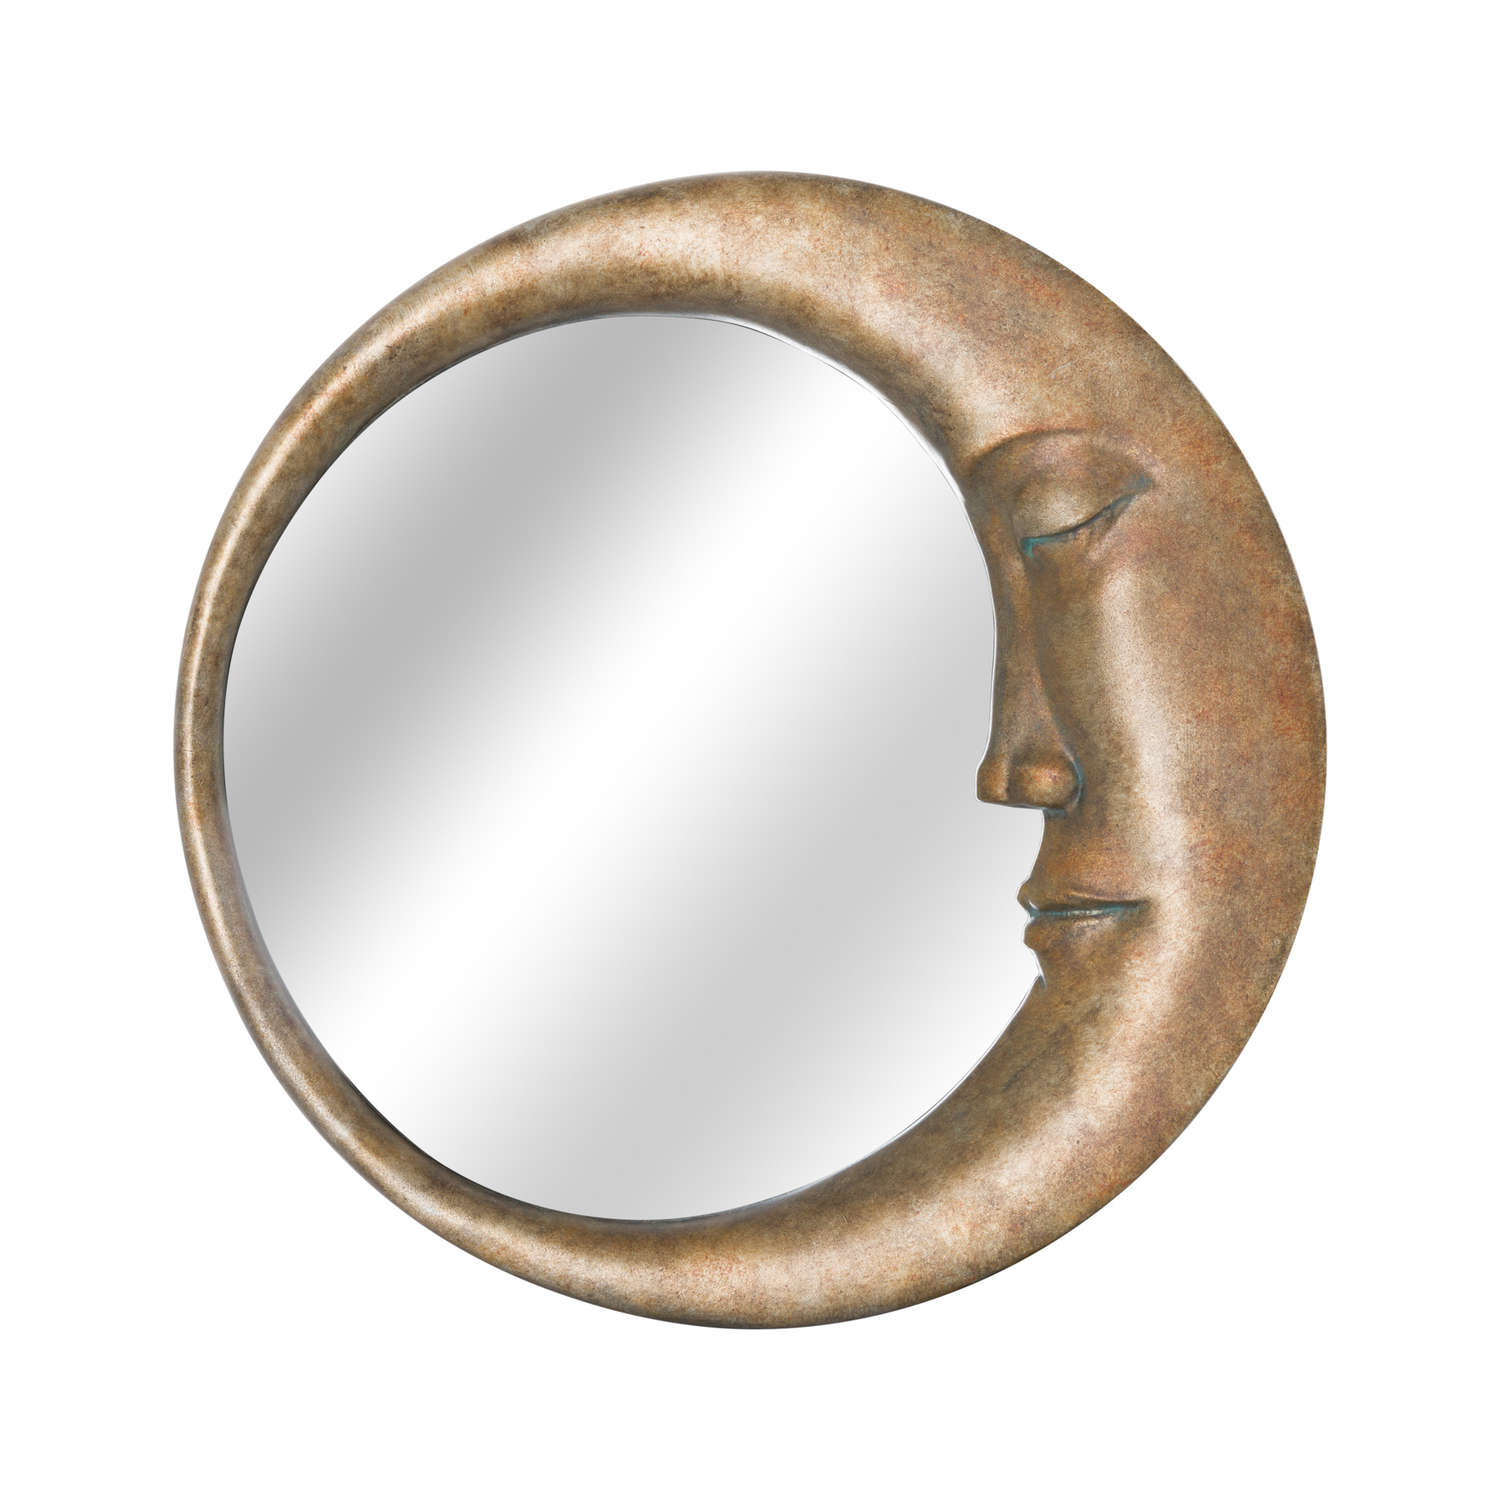 Man in the Moon Mirror in an Antique Gold Finish - Image 1